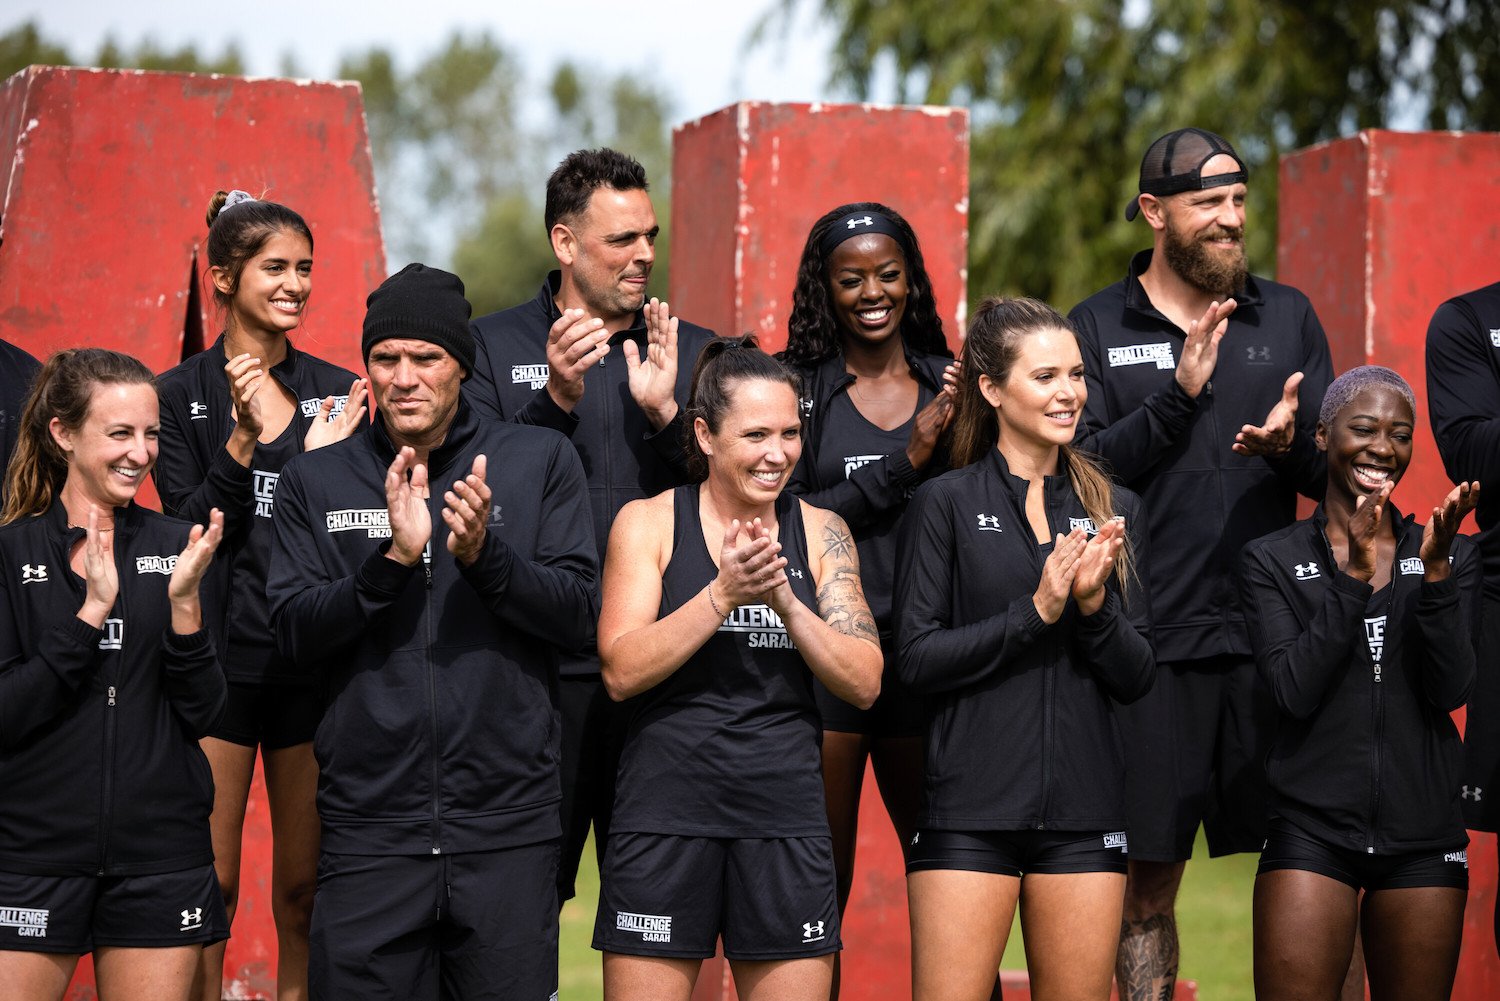 'The Challenge: USA' cast standing together and clapping in episode 8